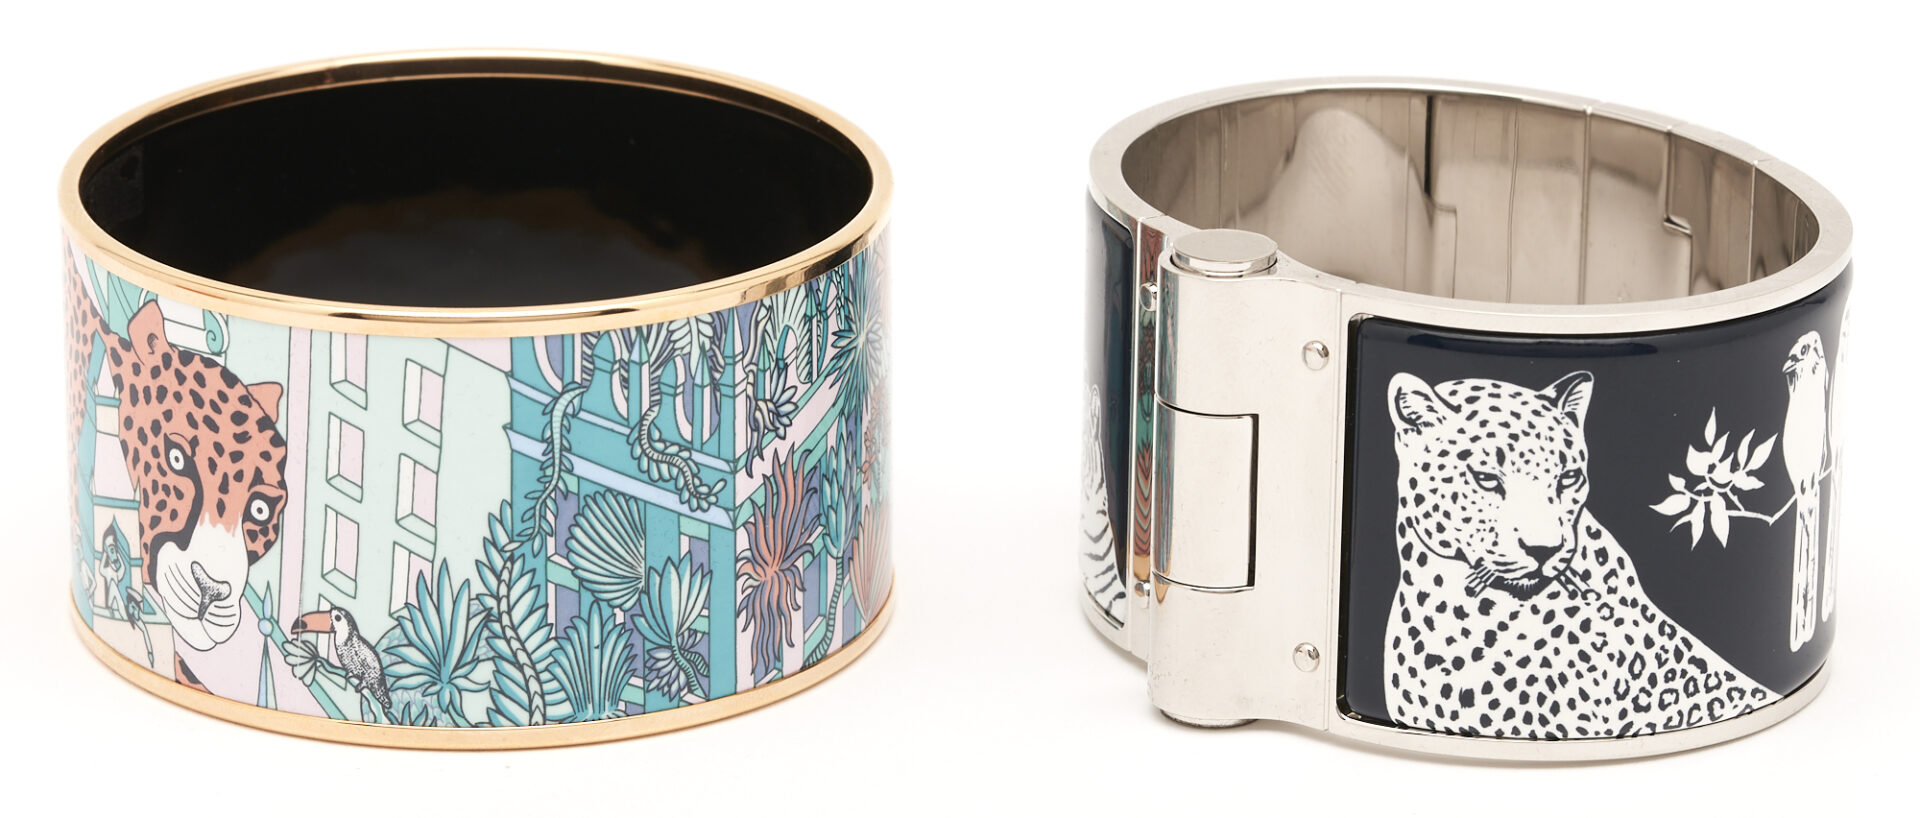 Lot 1143: 2 Limited Edition Hermes Extra Wide Printed Enamel Bracelets, Wild Cats